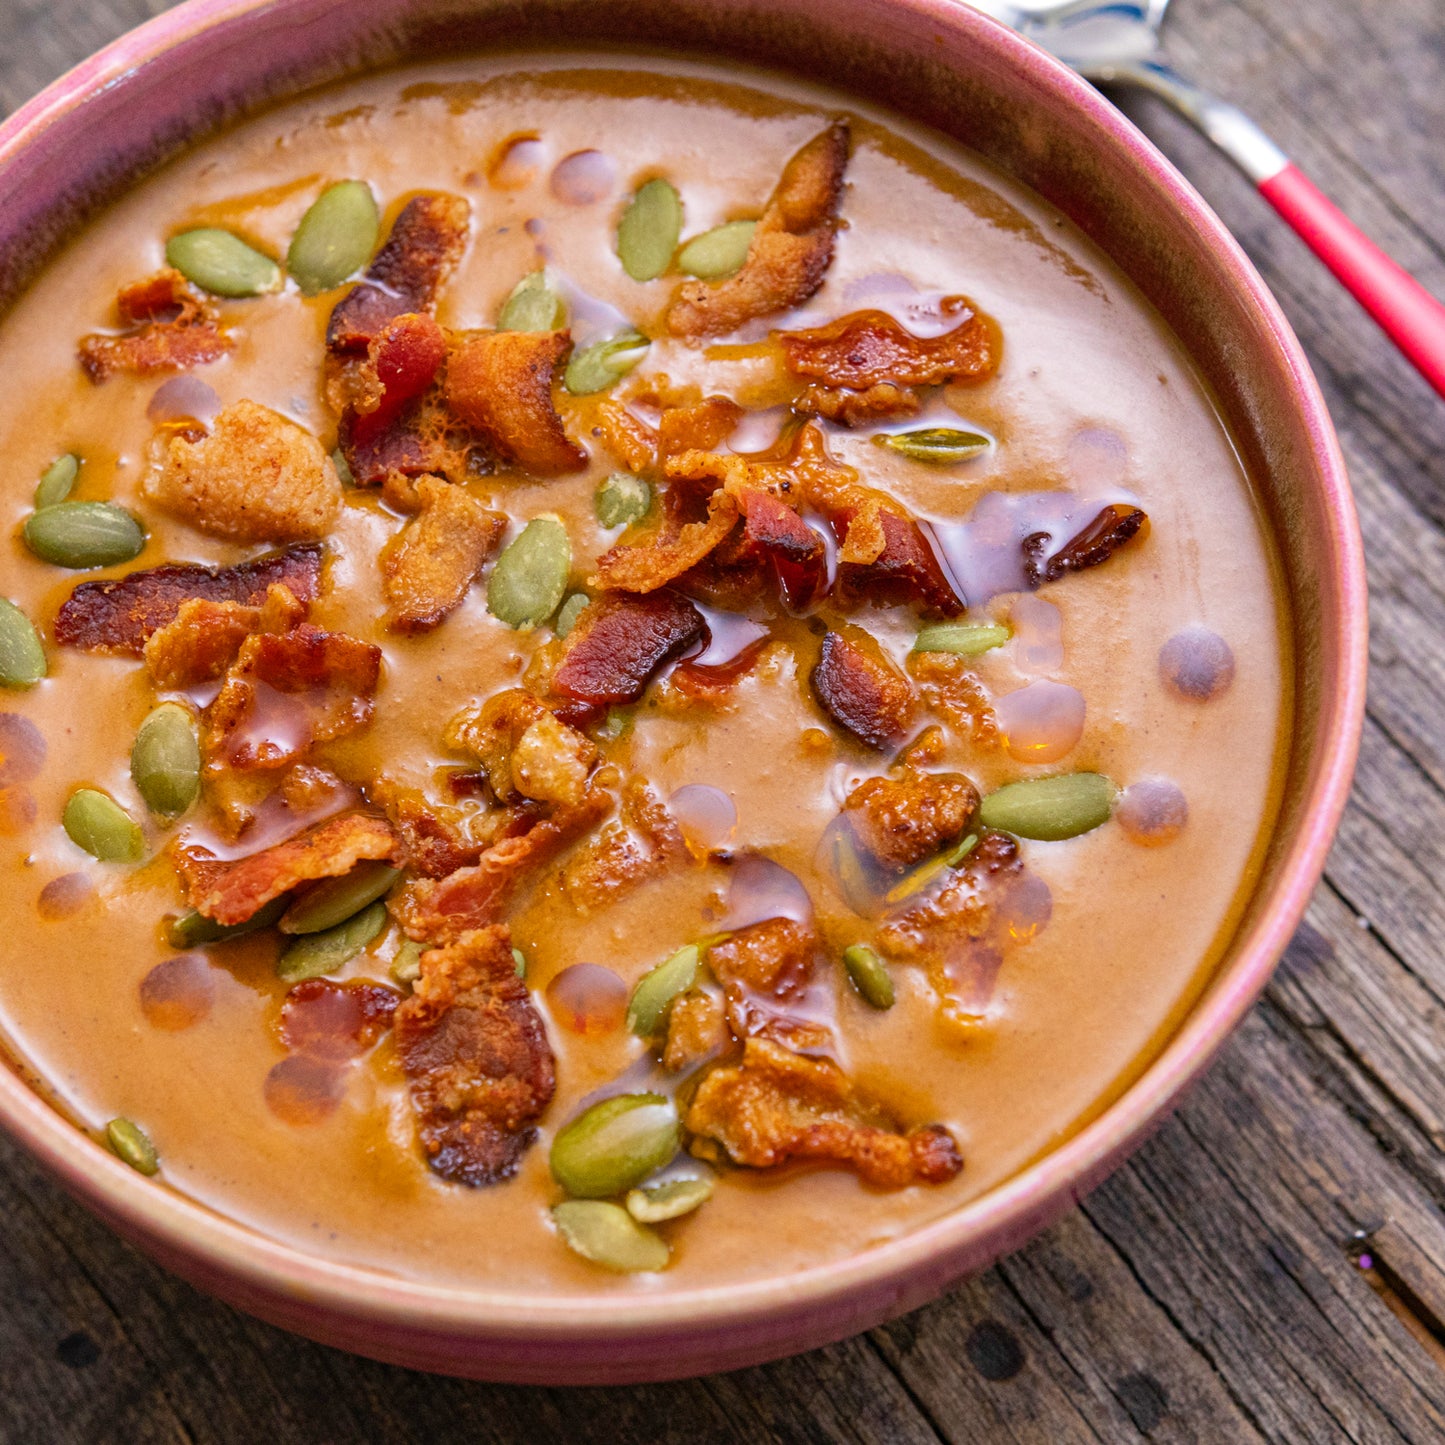 Decorated Spiced Pumpkin Soup in Bowl - Eat Proper Good